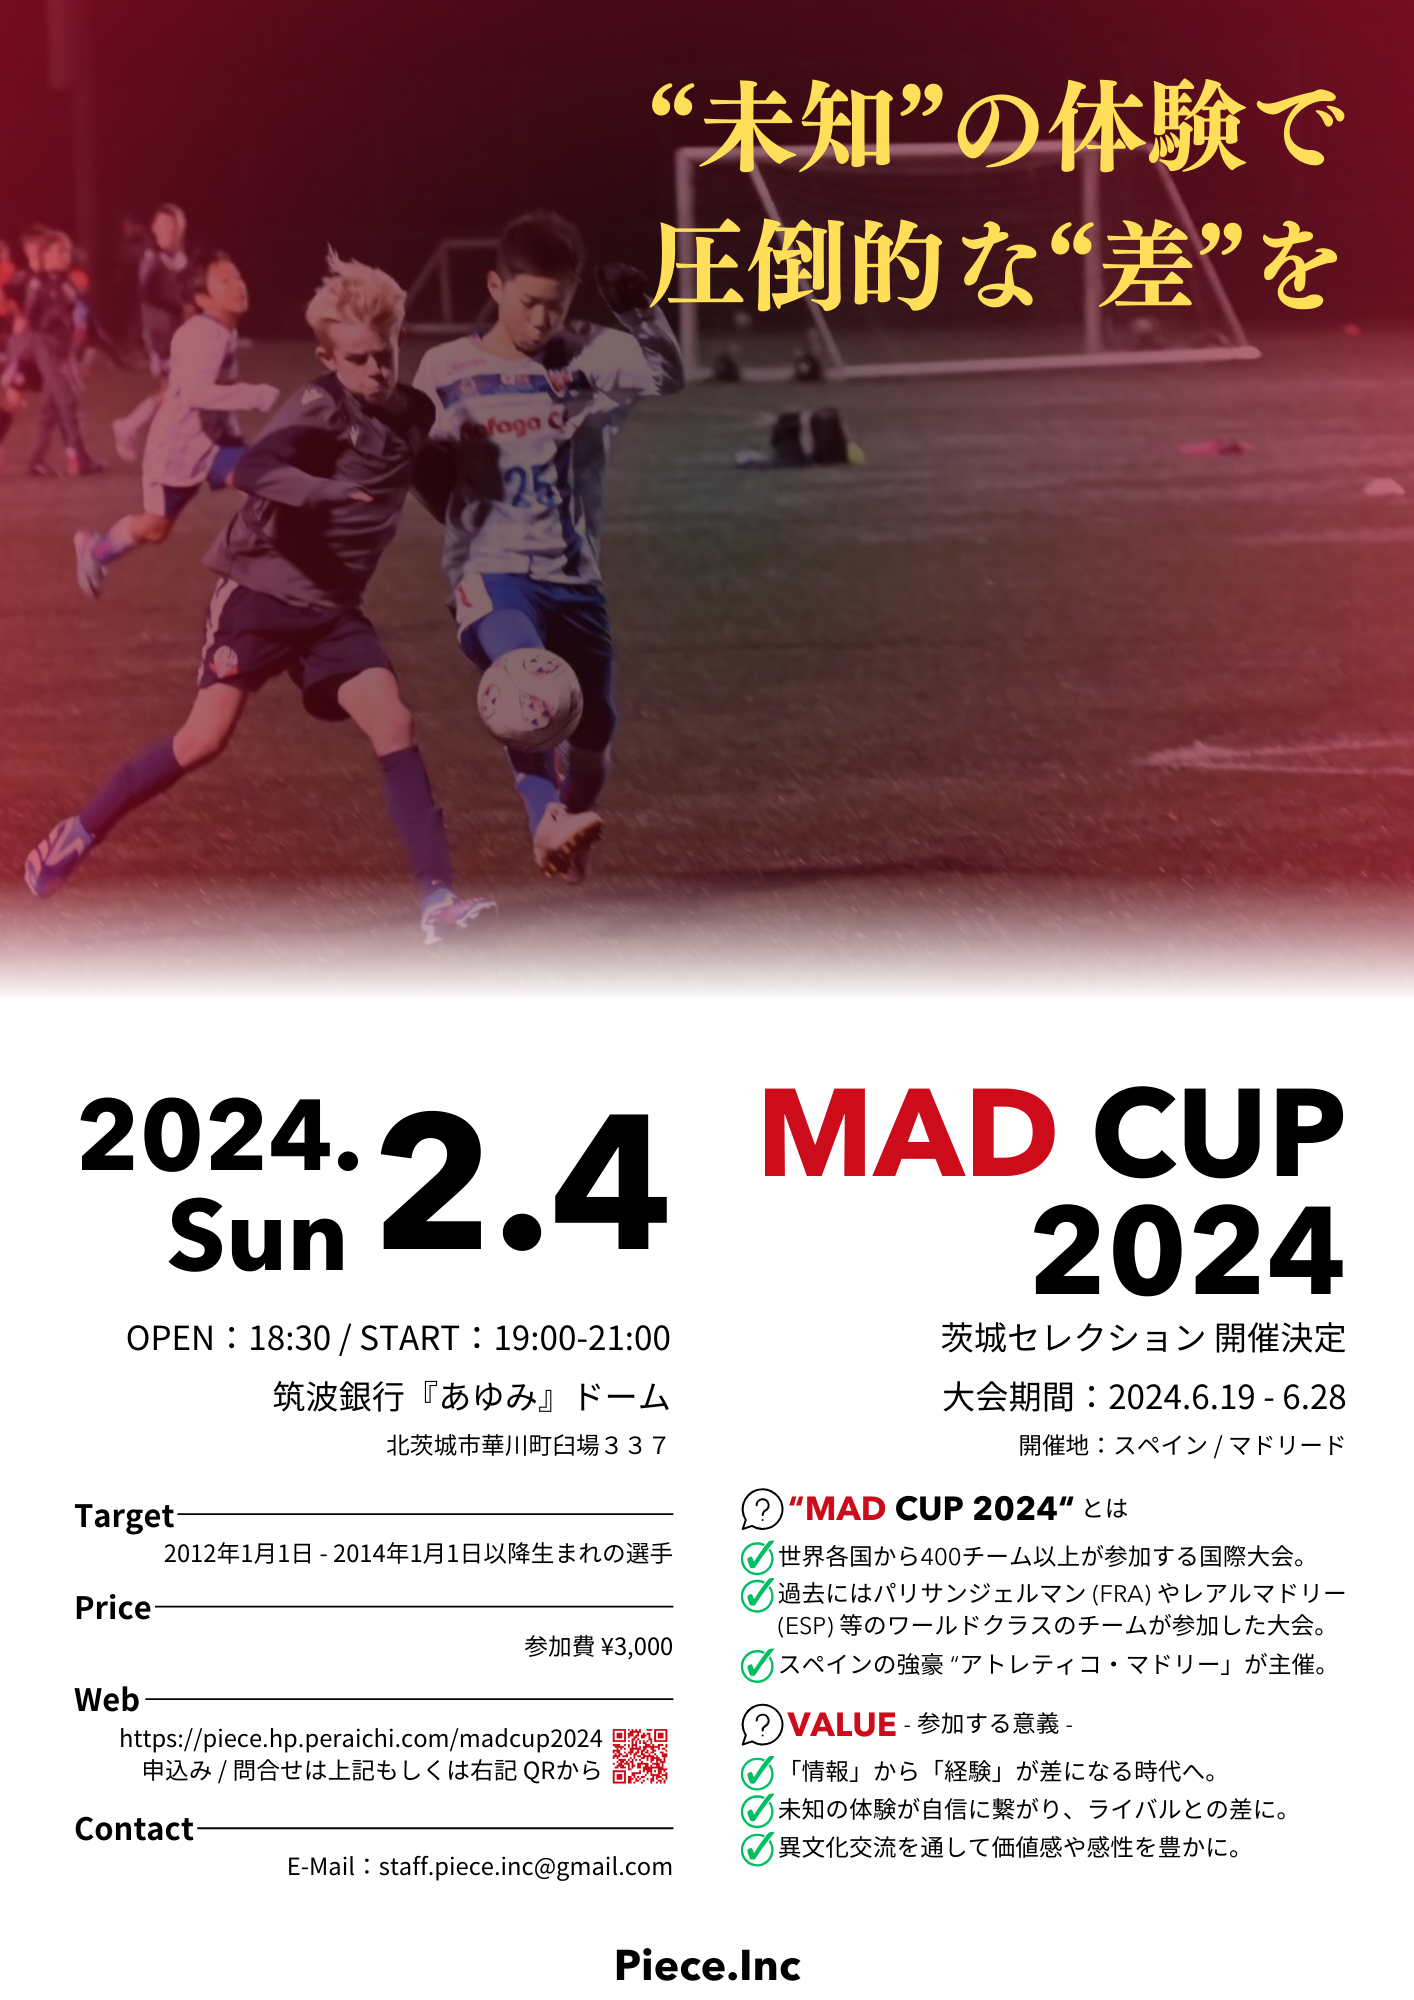 MAD CUP 2024 – スペイン遠征